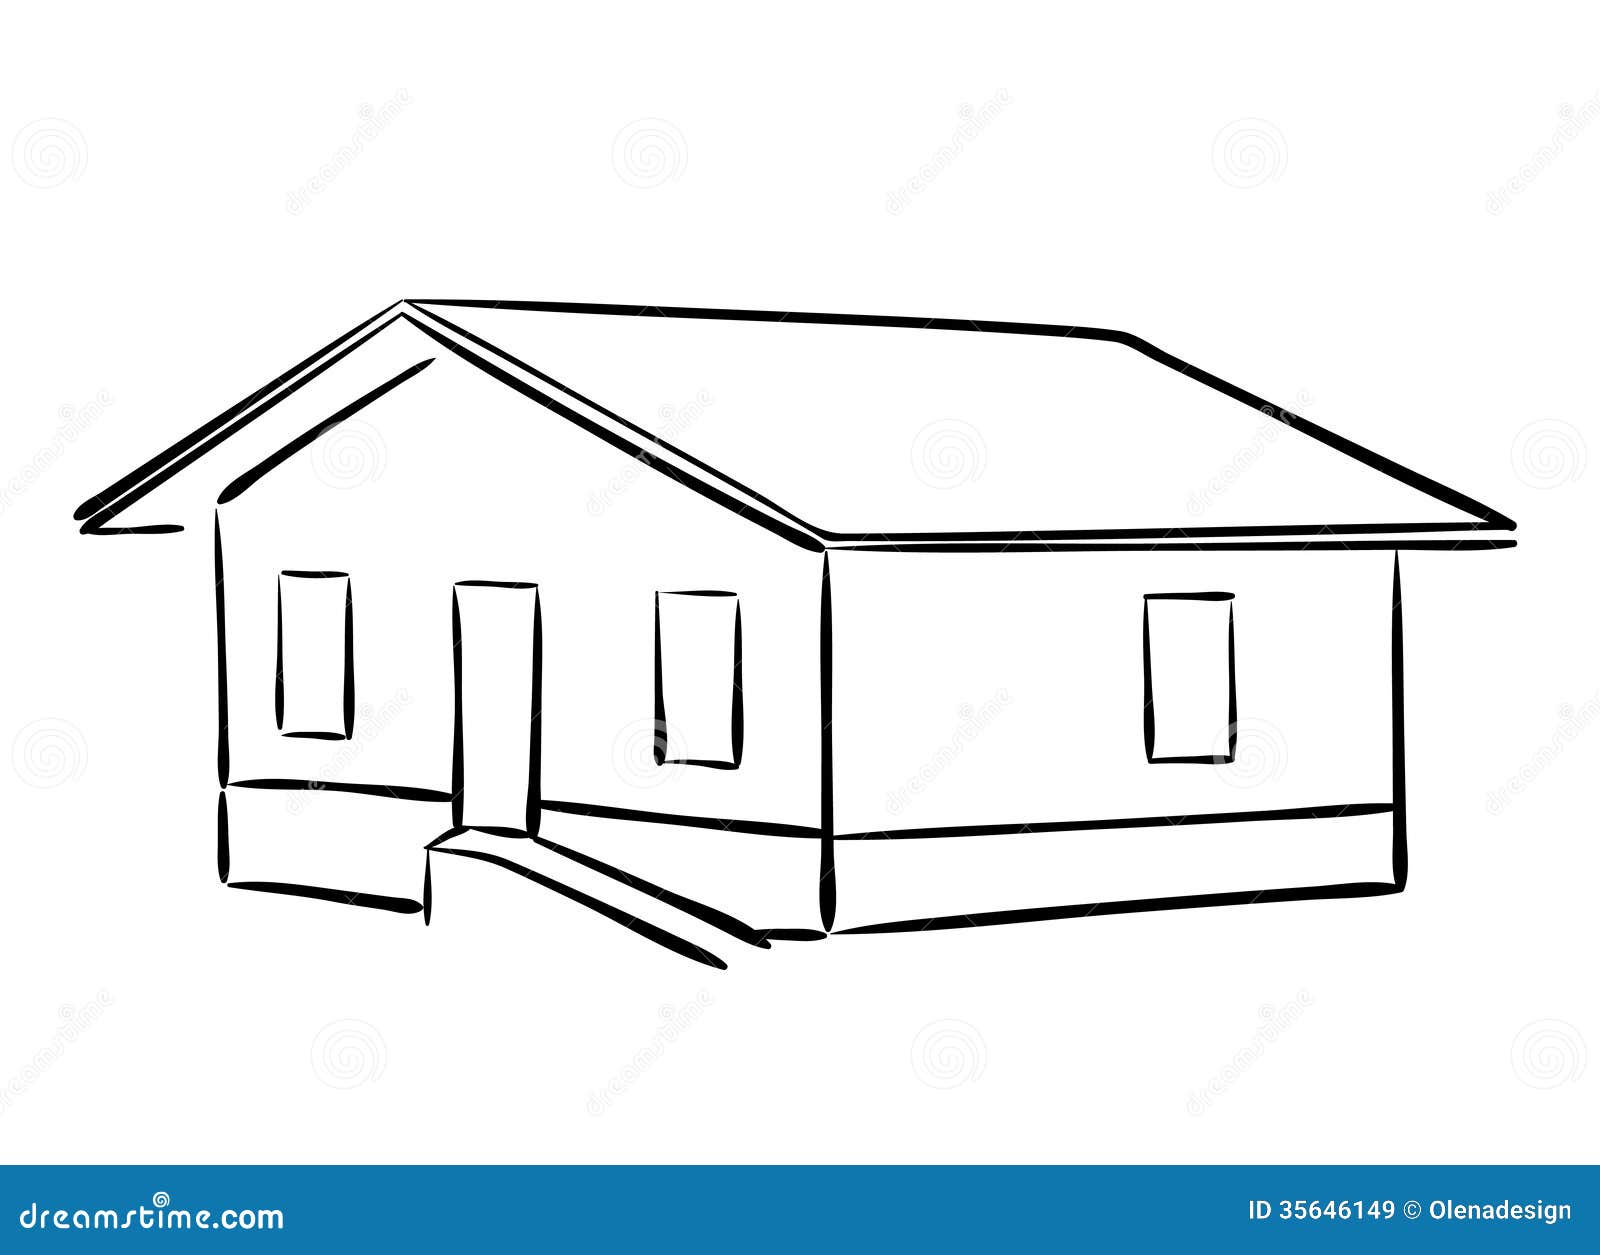 house industries clipart - photo #25